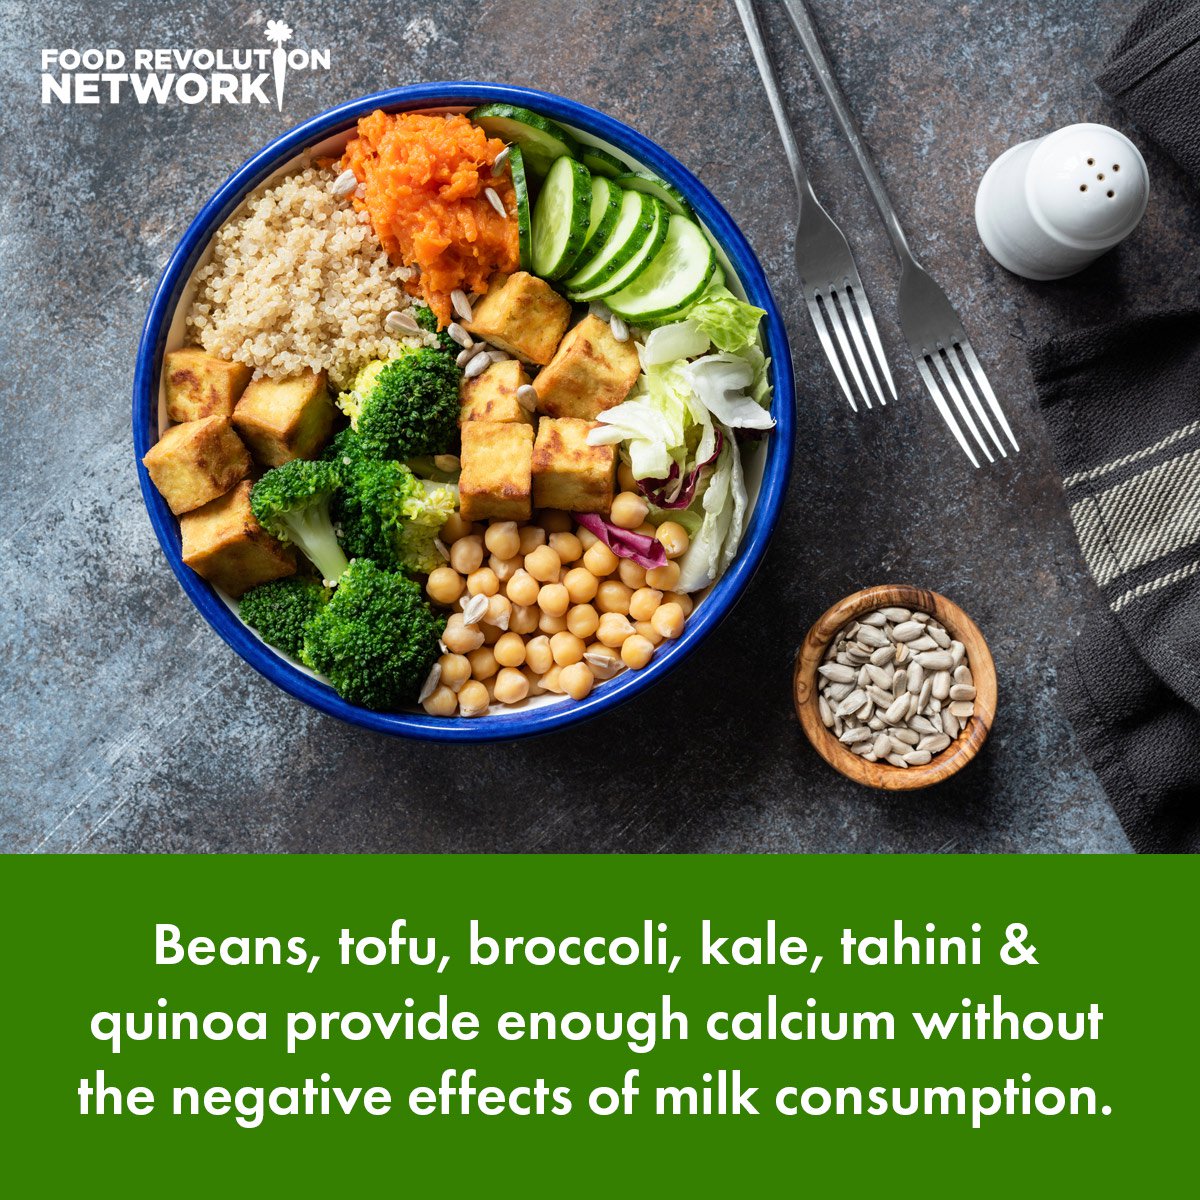 Beans, tofu, broccoli, kale, tahini & quinoa provide enough calcium without the negative effects of milk consumption.